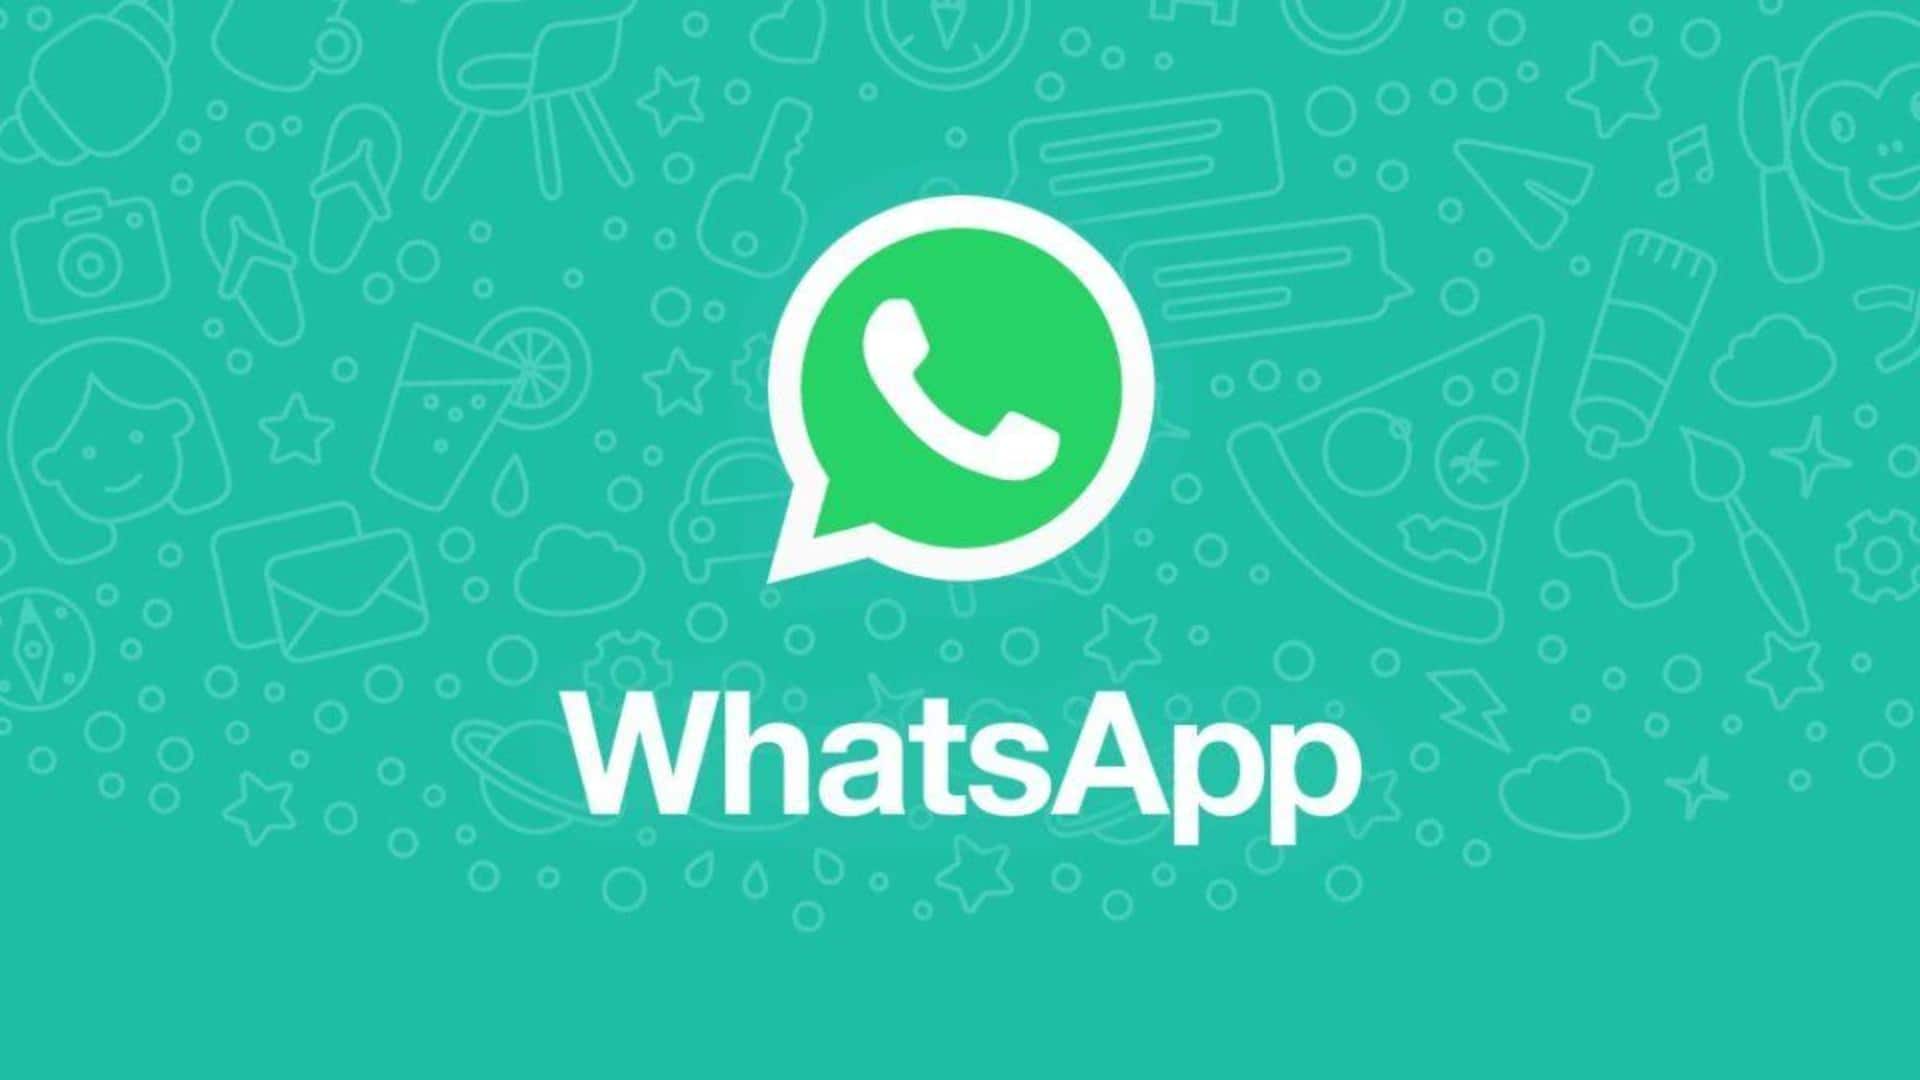 WhatsApp to allow status sharing on Facebook without leaving app